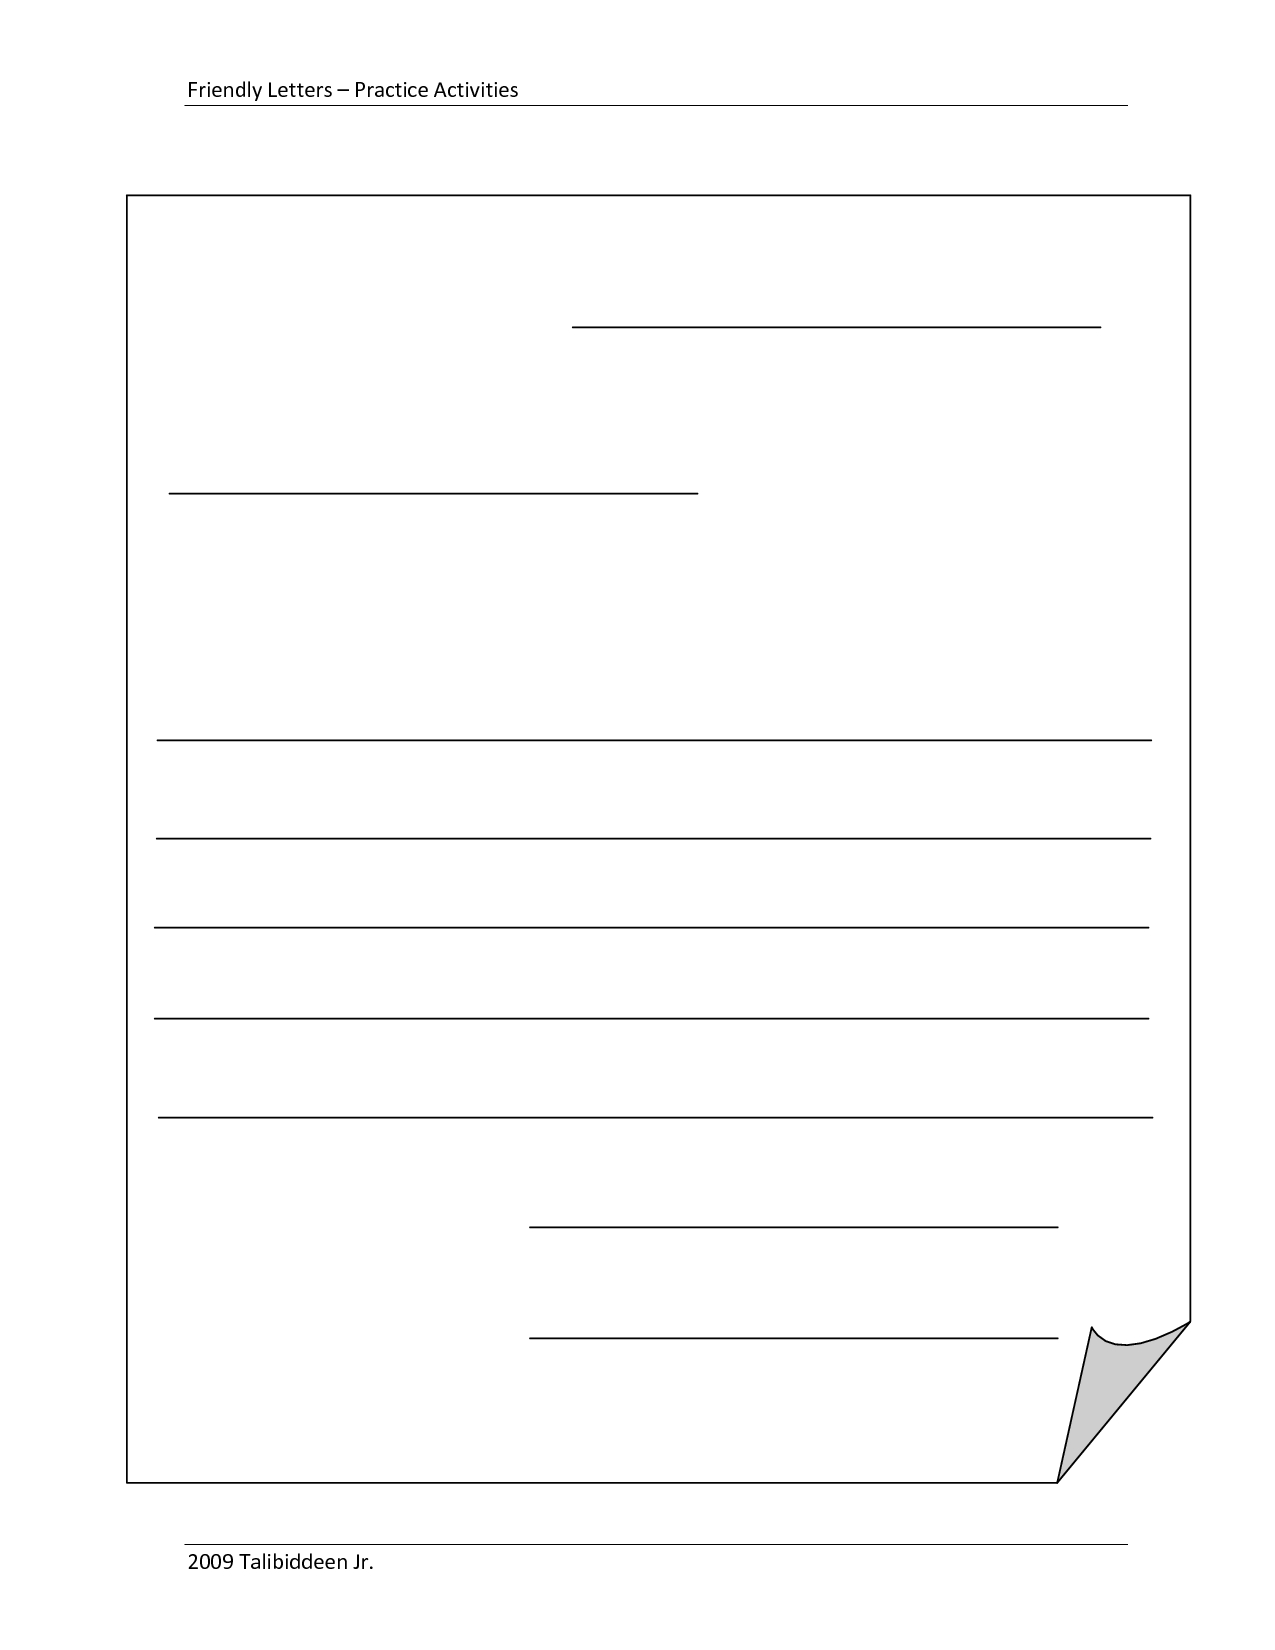 Blankletterformattemplate  Michelle  Friendly Letter Letter throughout Blank Letter Writing Template For Kids